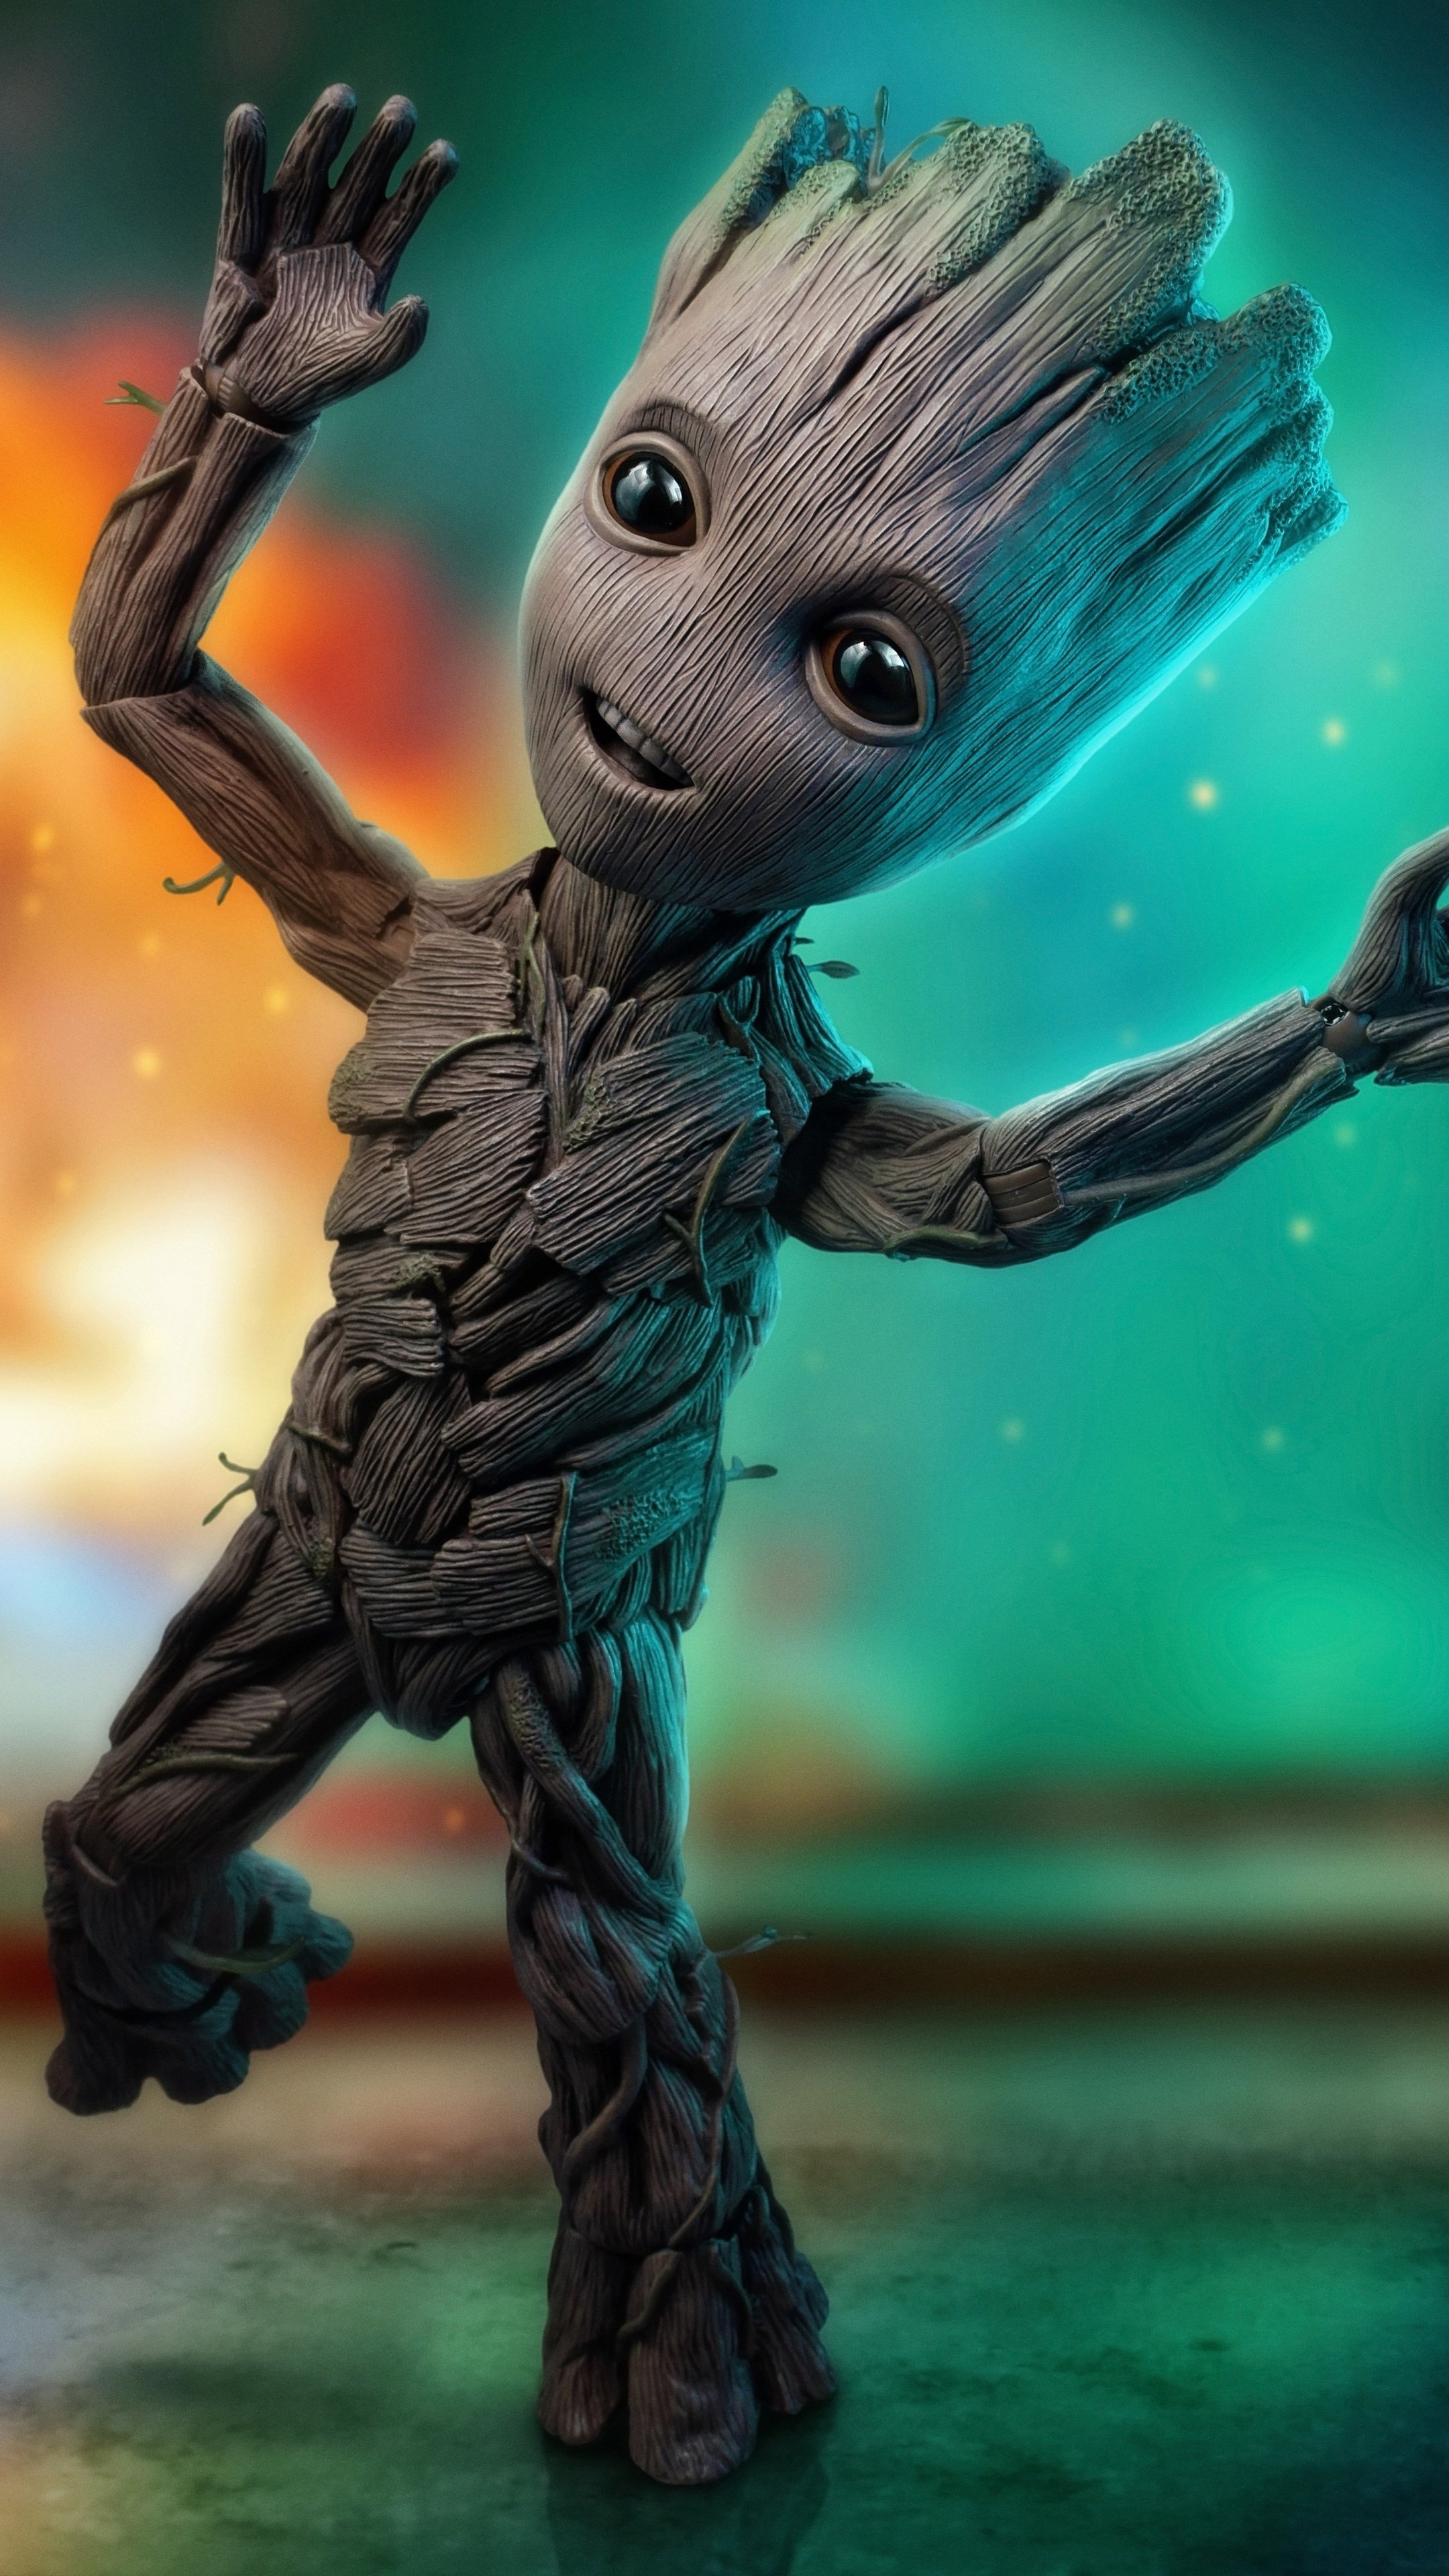 Guardians of the Galaxy Vol. 2, Baby Groot dancing wallpapers, Memorable soundtrack, Cute and lovable, 2160x3840 4K Handy